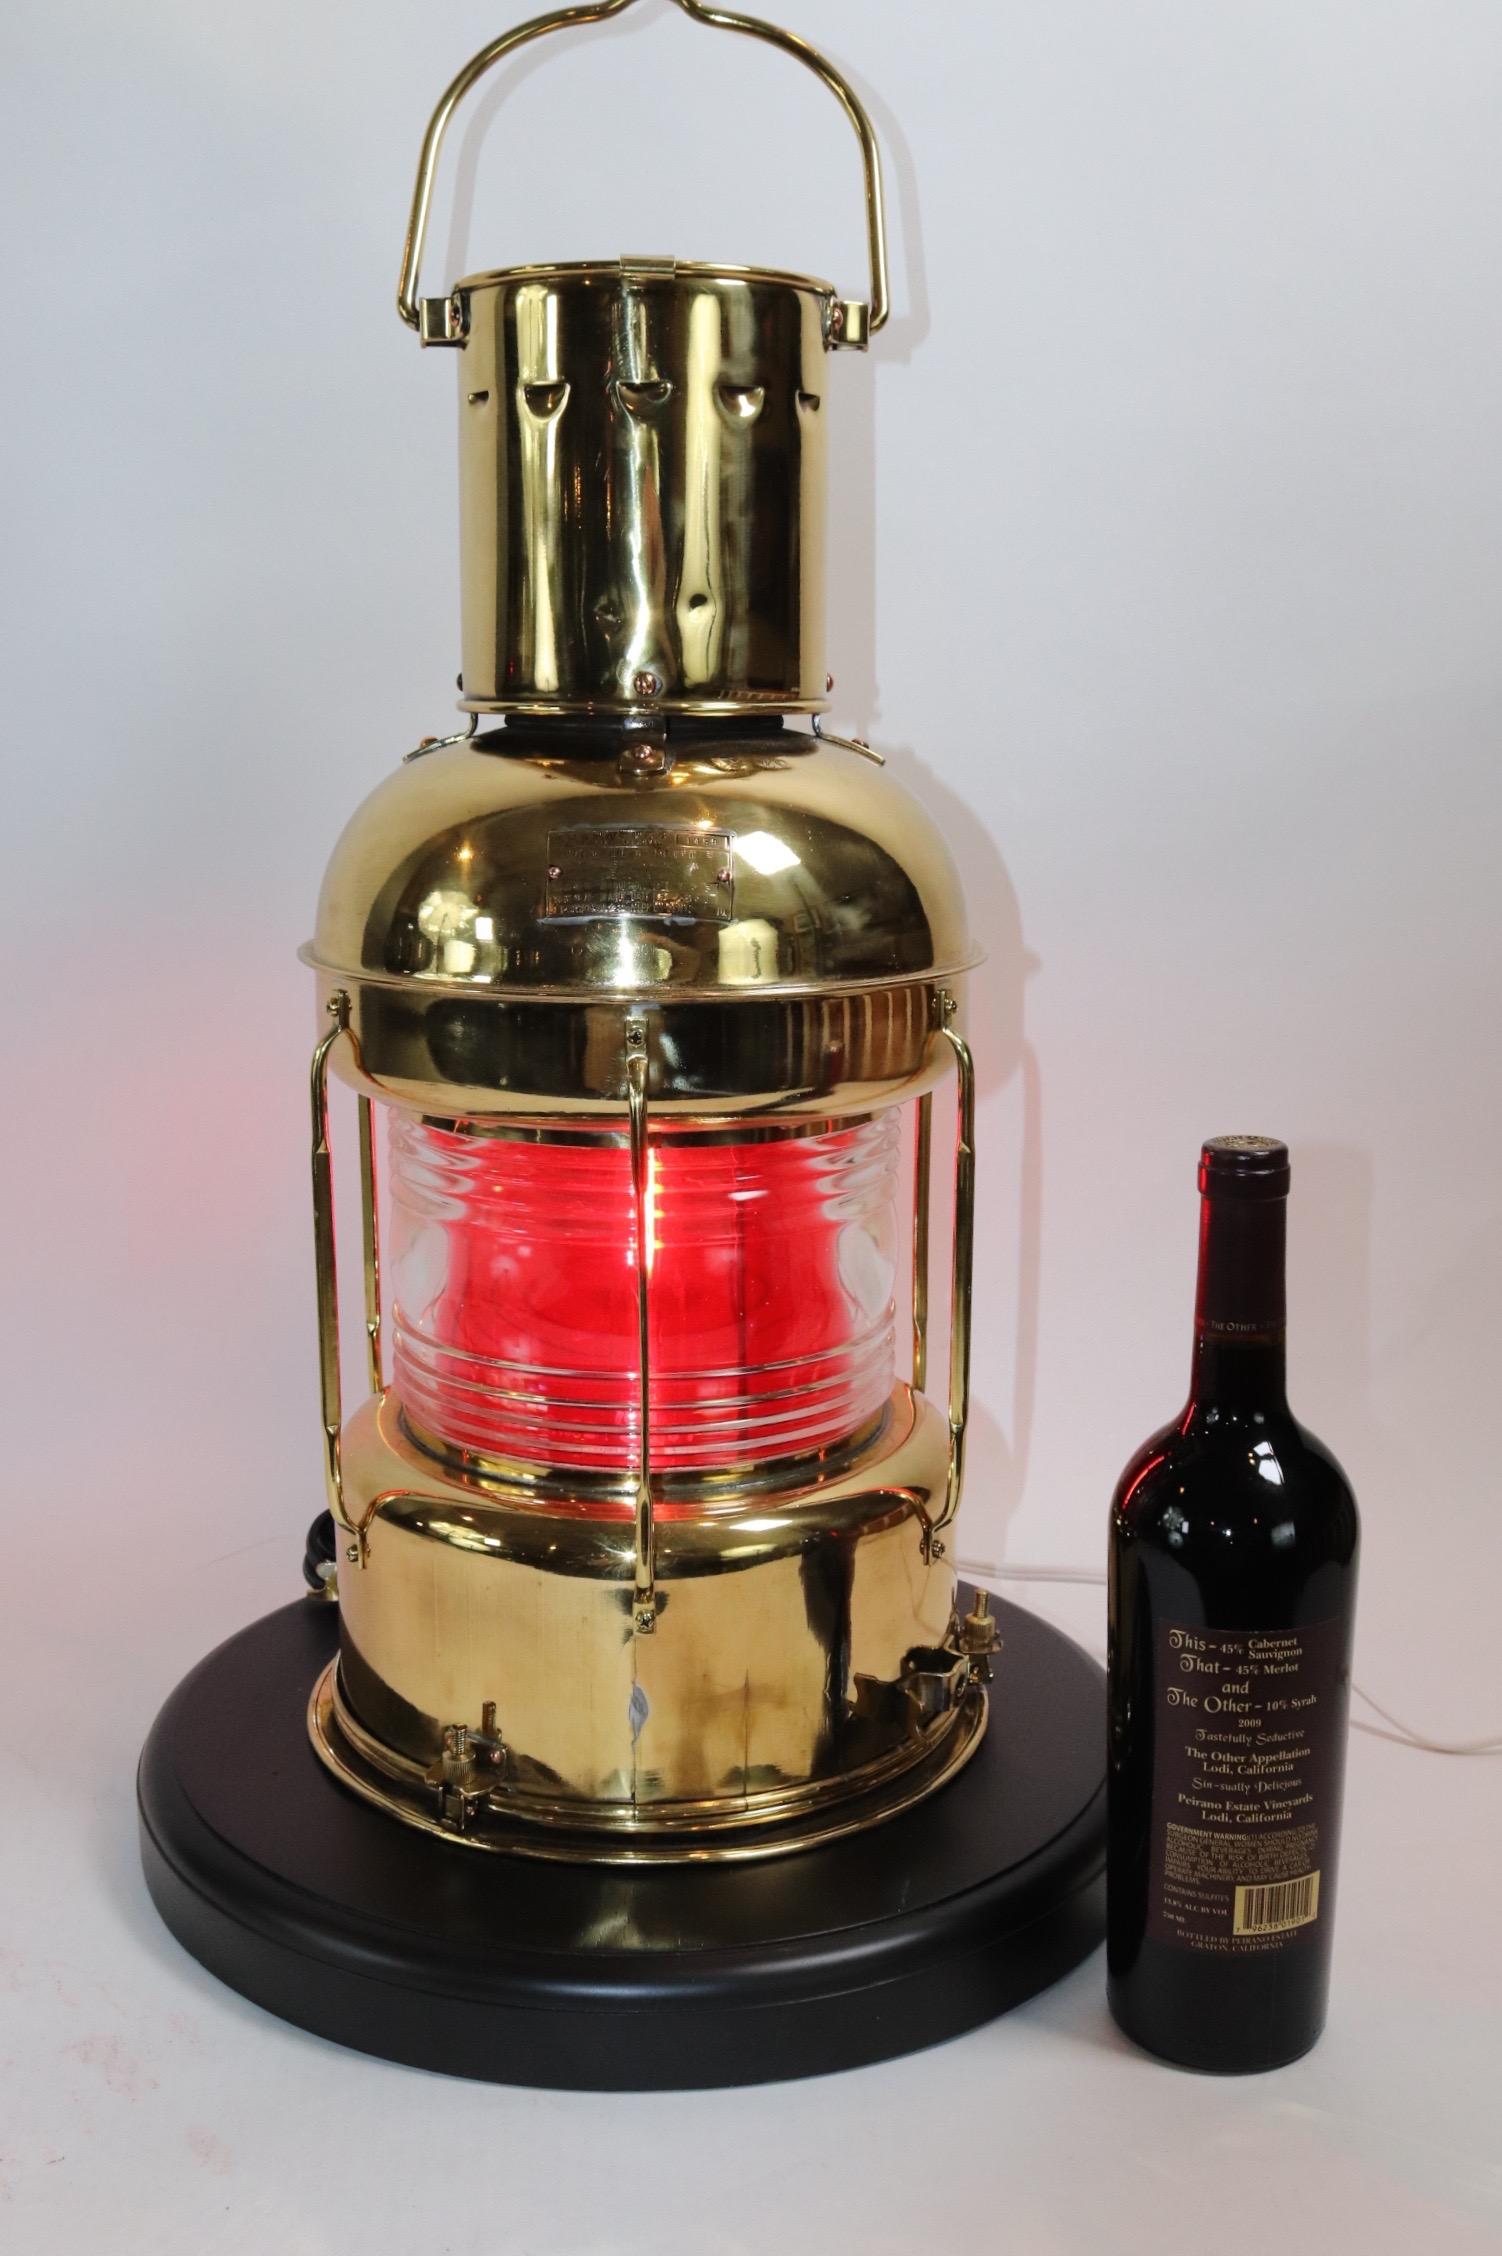 Highly polished ships lantern of solid brass with lacquered finish. With clear Fresnel glass lens and internal removable red filter. Mounted to a custom wood base with routed edge and rich dark finish. Lantern has been wired for home display. Weight